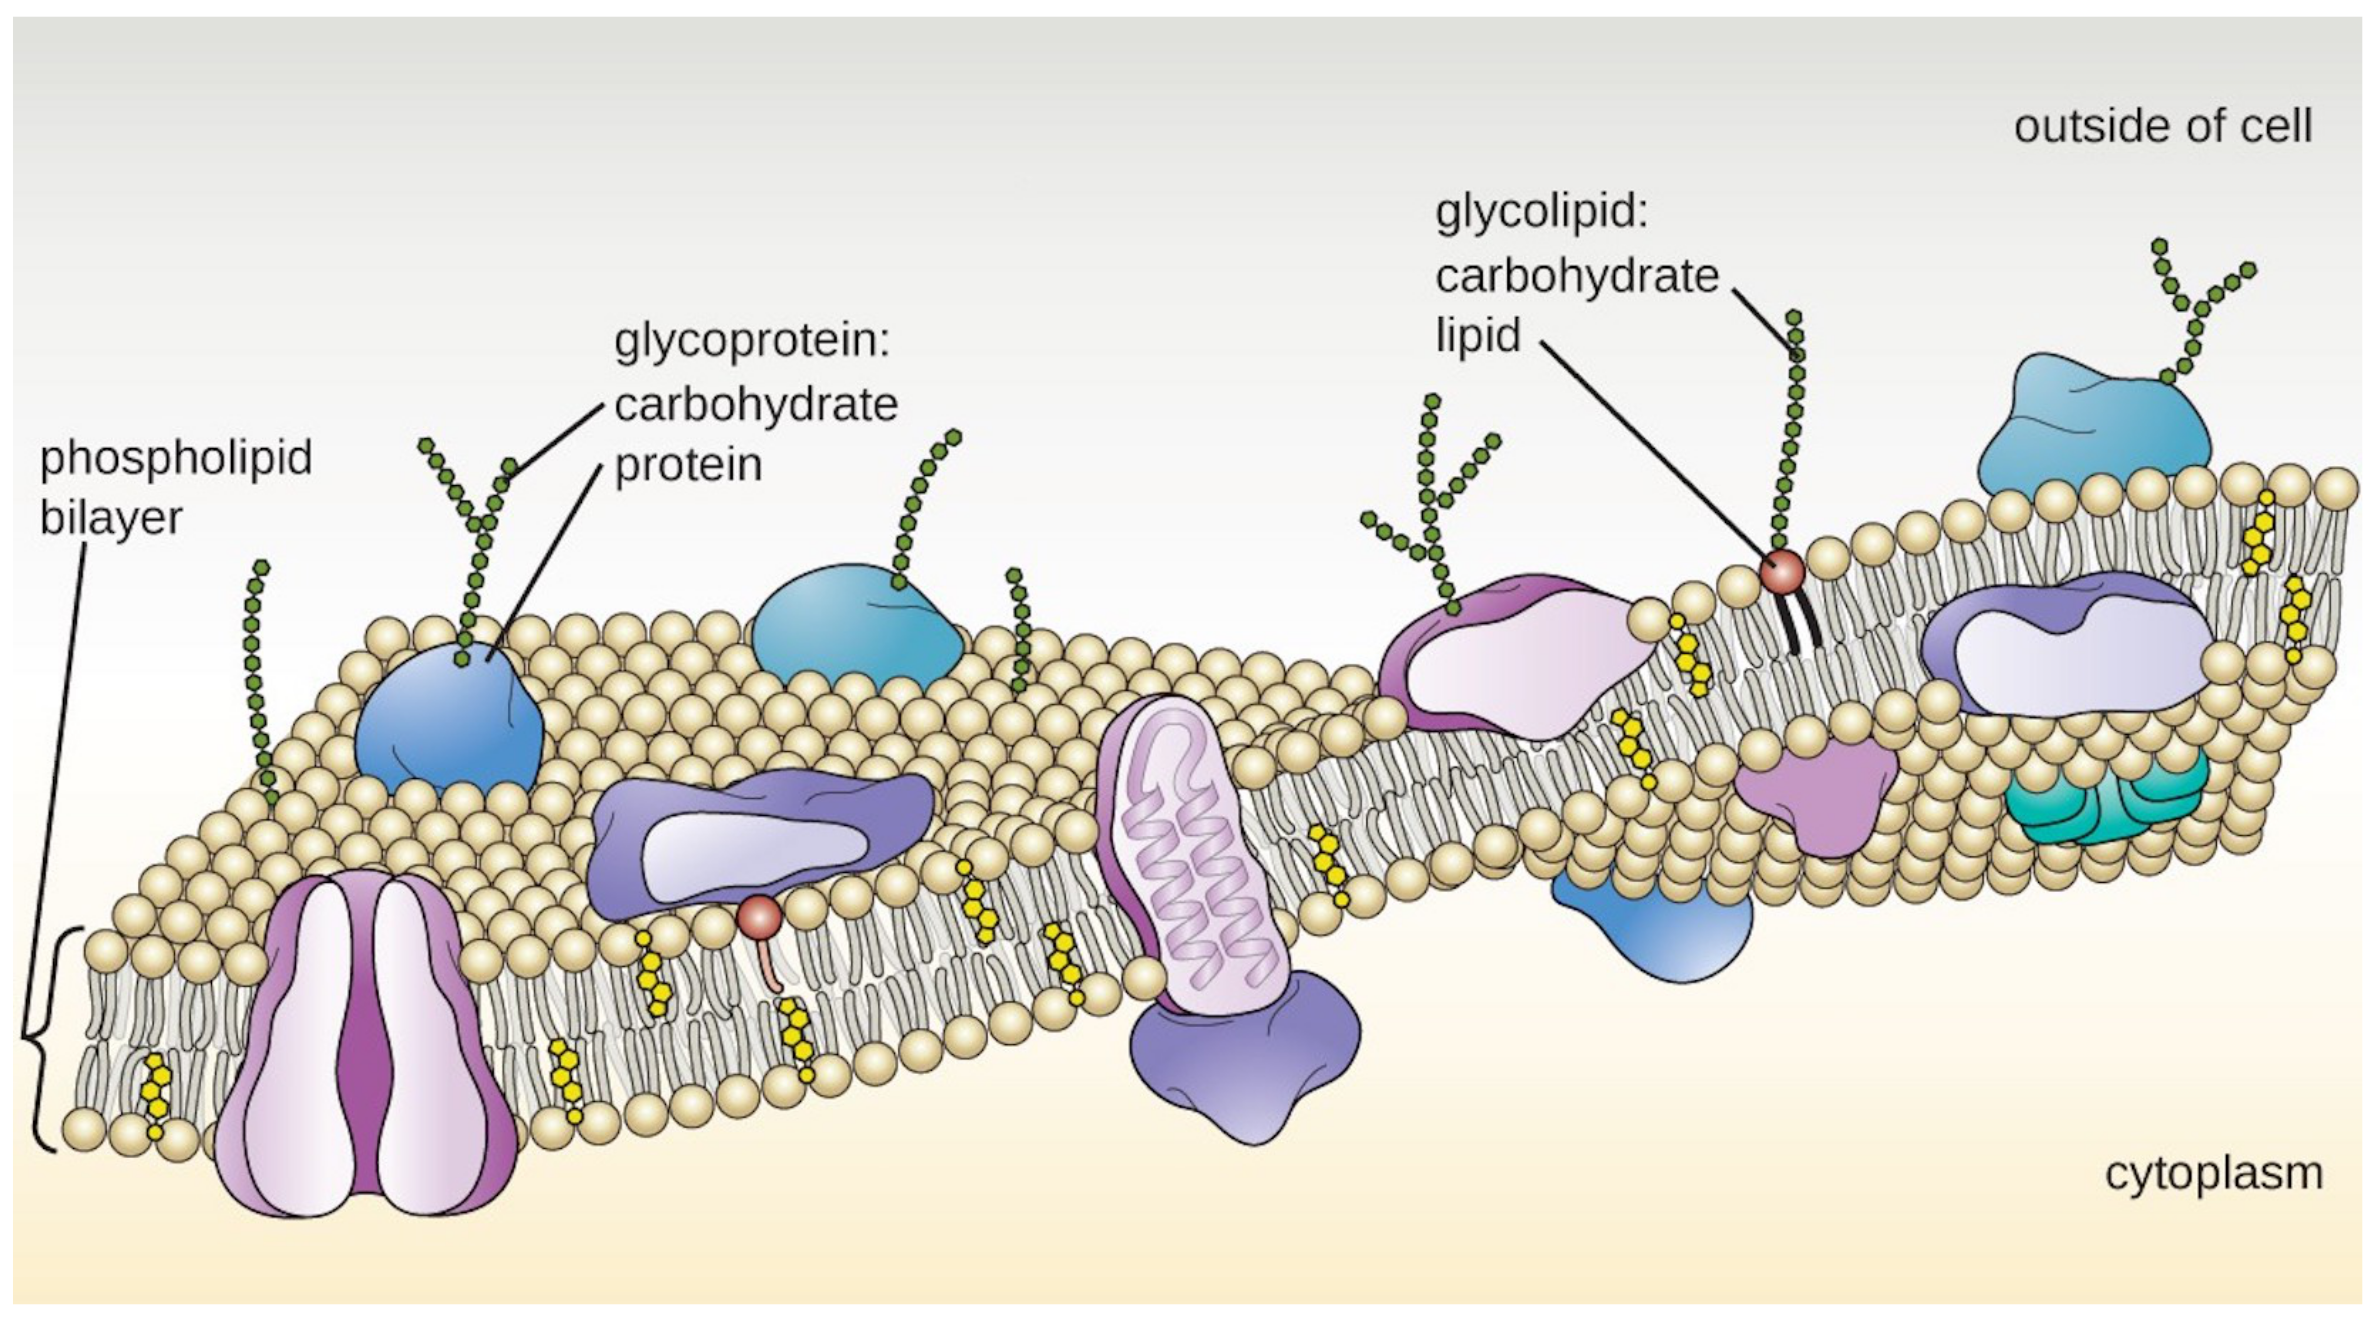 A drawing of the plasma membrane. The top of the diagram is labeled outside of the cell, the bottom is labeled cytoplasm. The membrane is made of mostly a phospholipid bilayer separating these two regions. Each phospholipid is drawn as a sphere with two tails. There are two layers of phospholipids making up the bilayer; each phospholipid layer has the sphere towards the outside of the bilayer and the two tails towards the inside of the bilayer. Embedded within the phospholipid bilayer are a variety of large proteins. Glycolipids have long carbohydrate chains (shown as a chain of hexagons) attached to a single phospholipid; the carbohydrates are always on the outside of the membrane. Glycoproteins have a long carbohydrate chain attached to a protein; the carbohydrates are on the outside of the membrane. The cytoskeleton is shown as a thin layer of line just under the inside of the phospholipid bilayer.